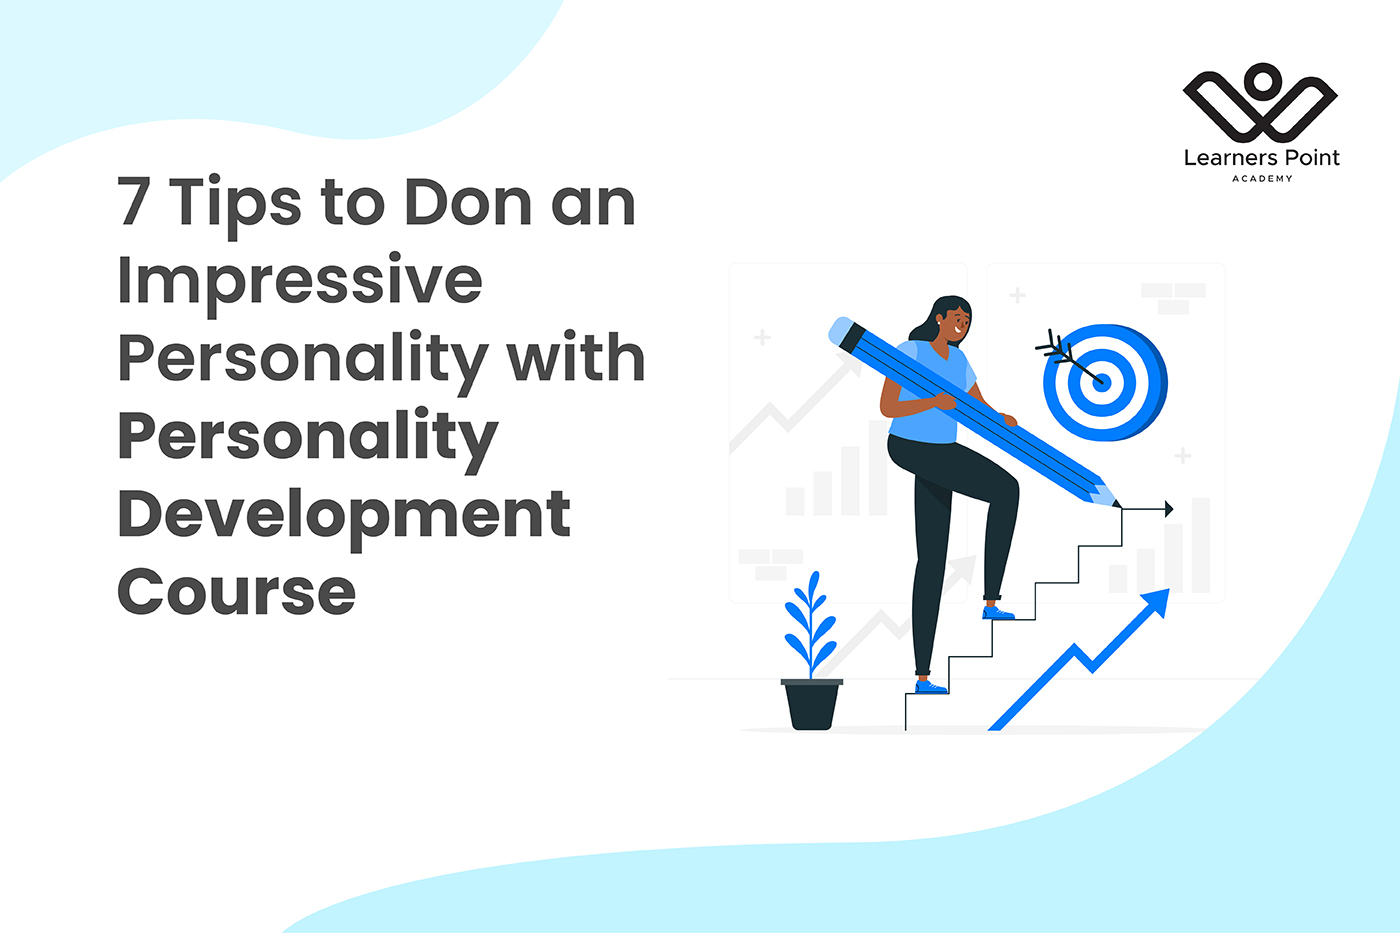 7 Tips to Don an Impressive Personality with Personality Development Course